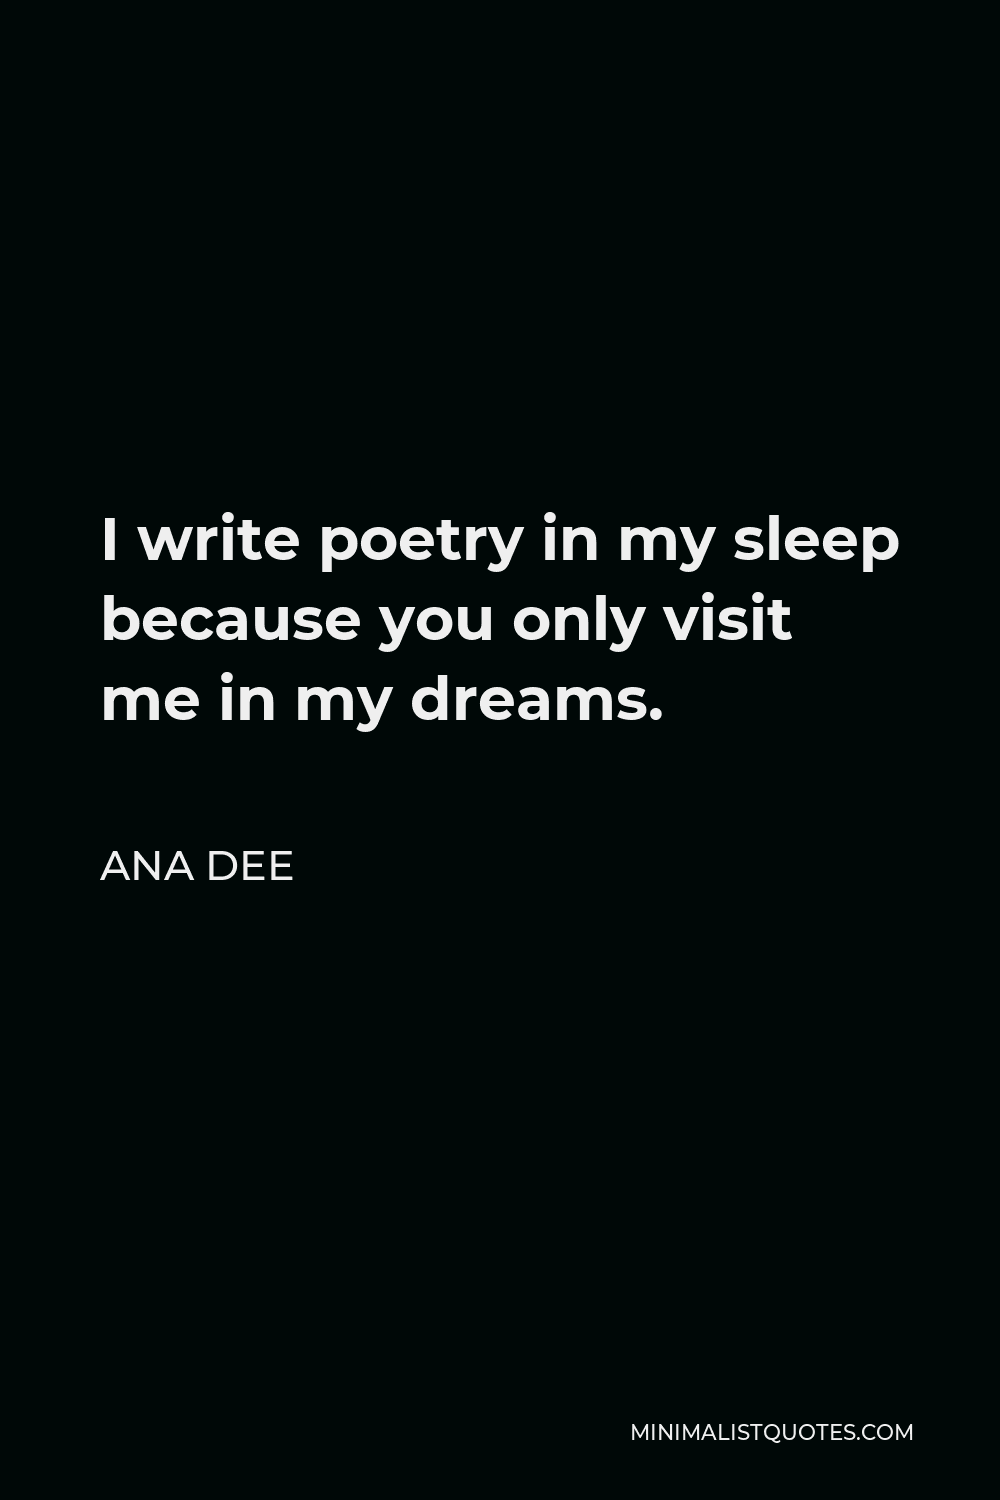 Ana Dee Quote - I write poetry in my sleep because you only visit me in my dreams.